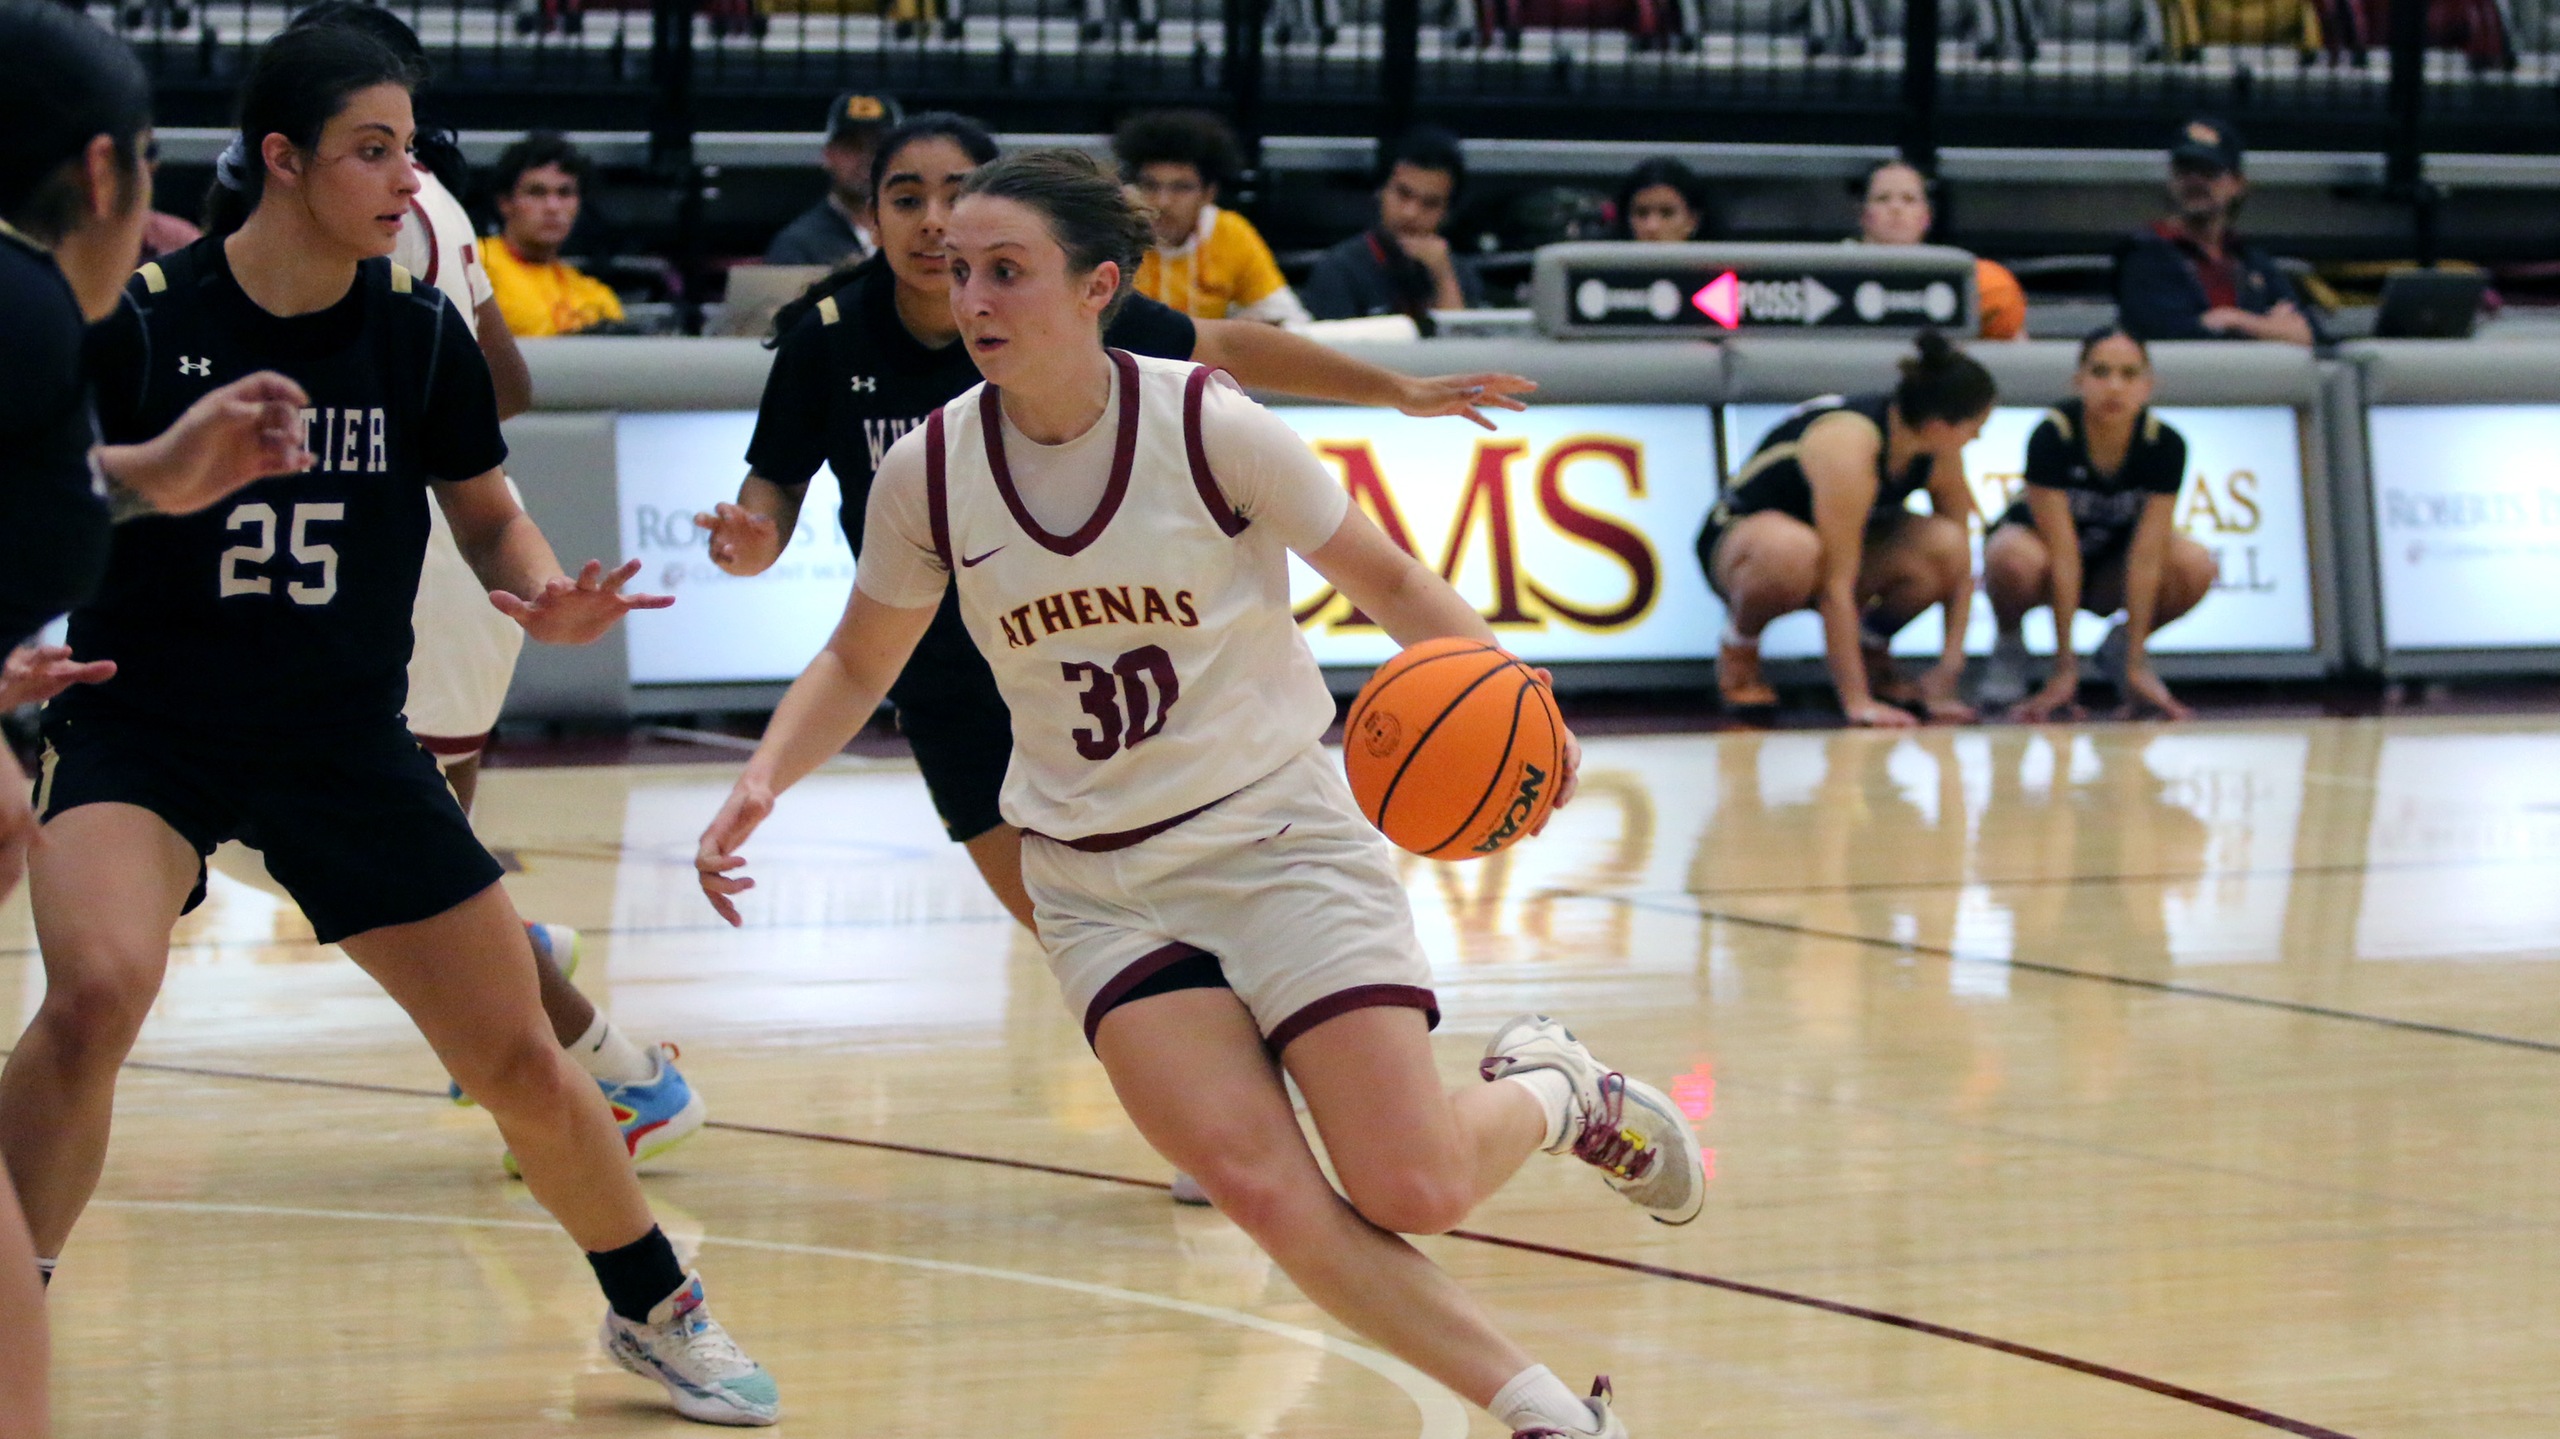 Sadie Heckman set a new career high with 12 points (photo by Stella Cheng)